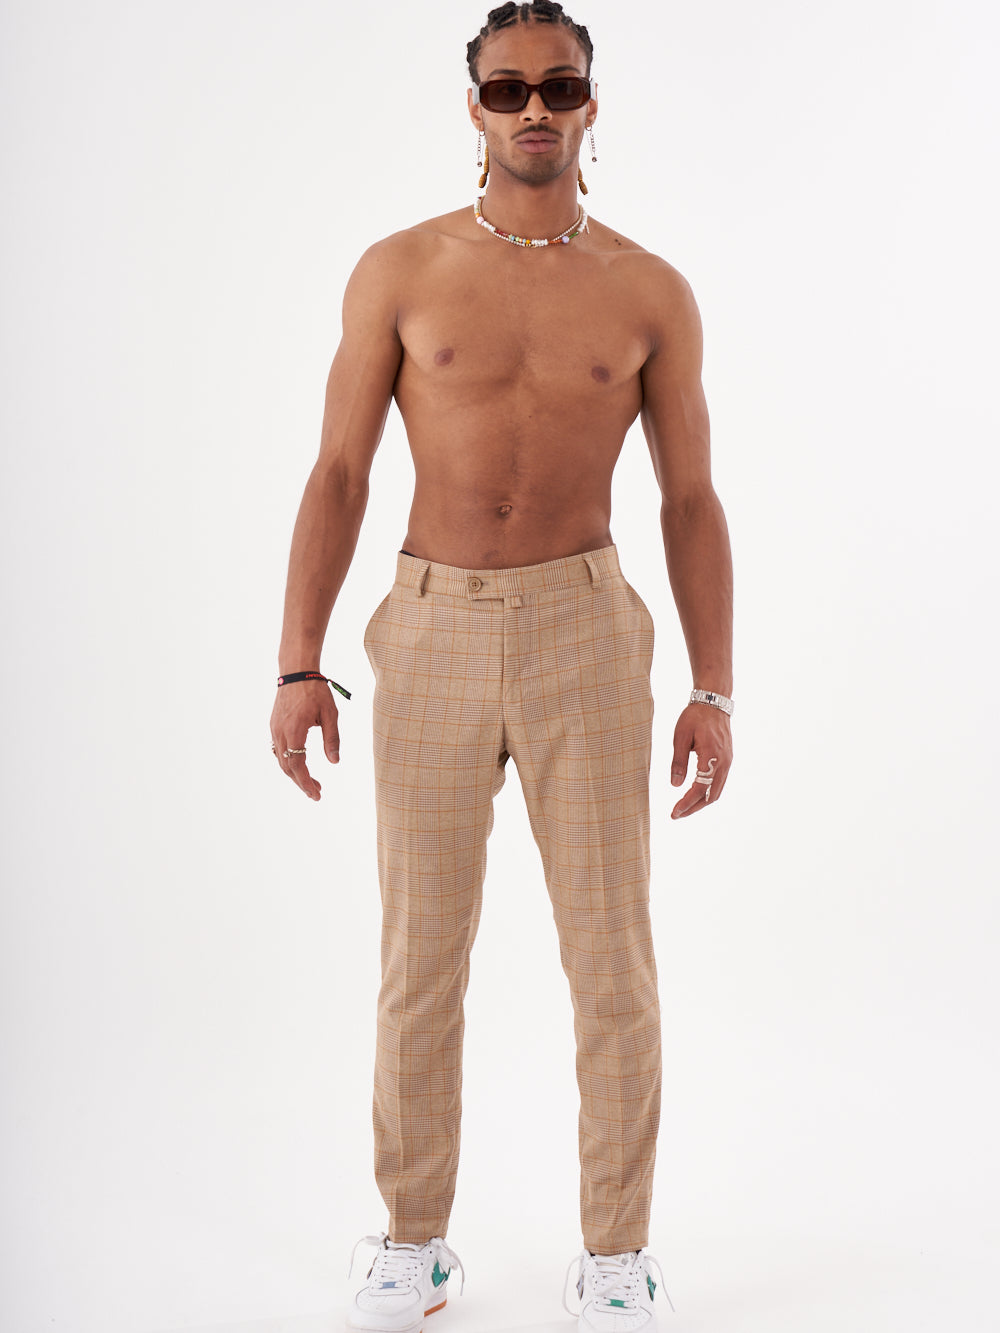 A man in a BAROT PANTS posing for a photo.